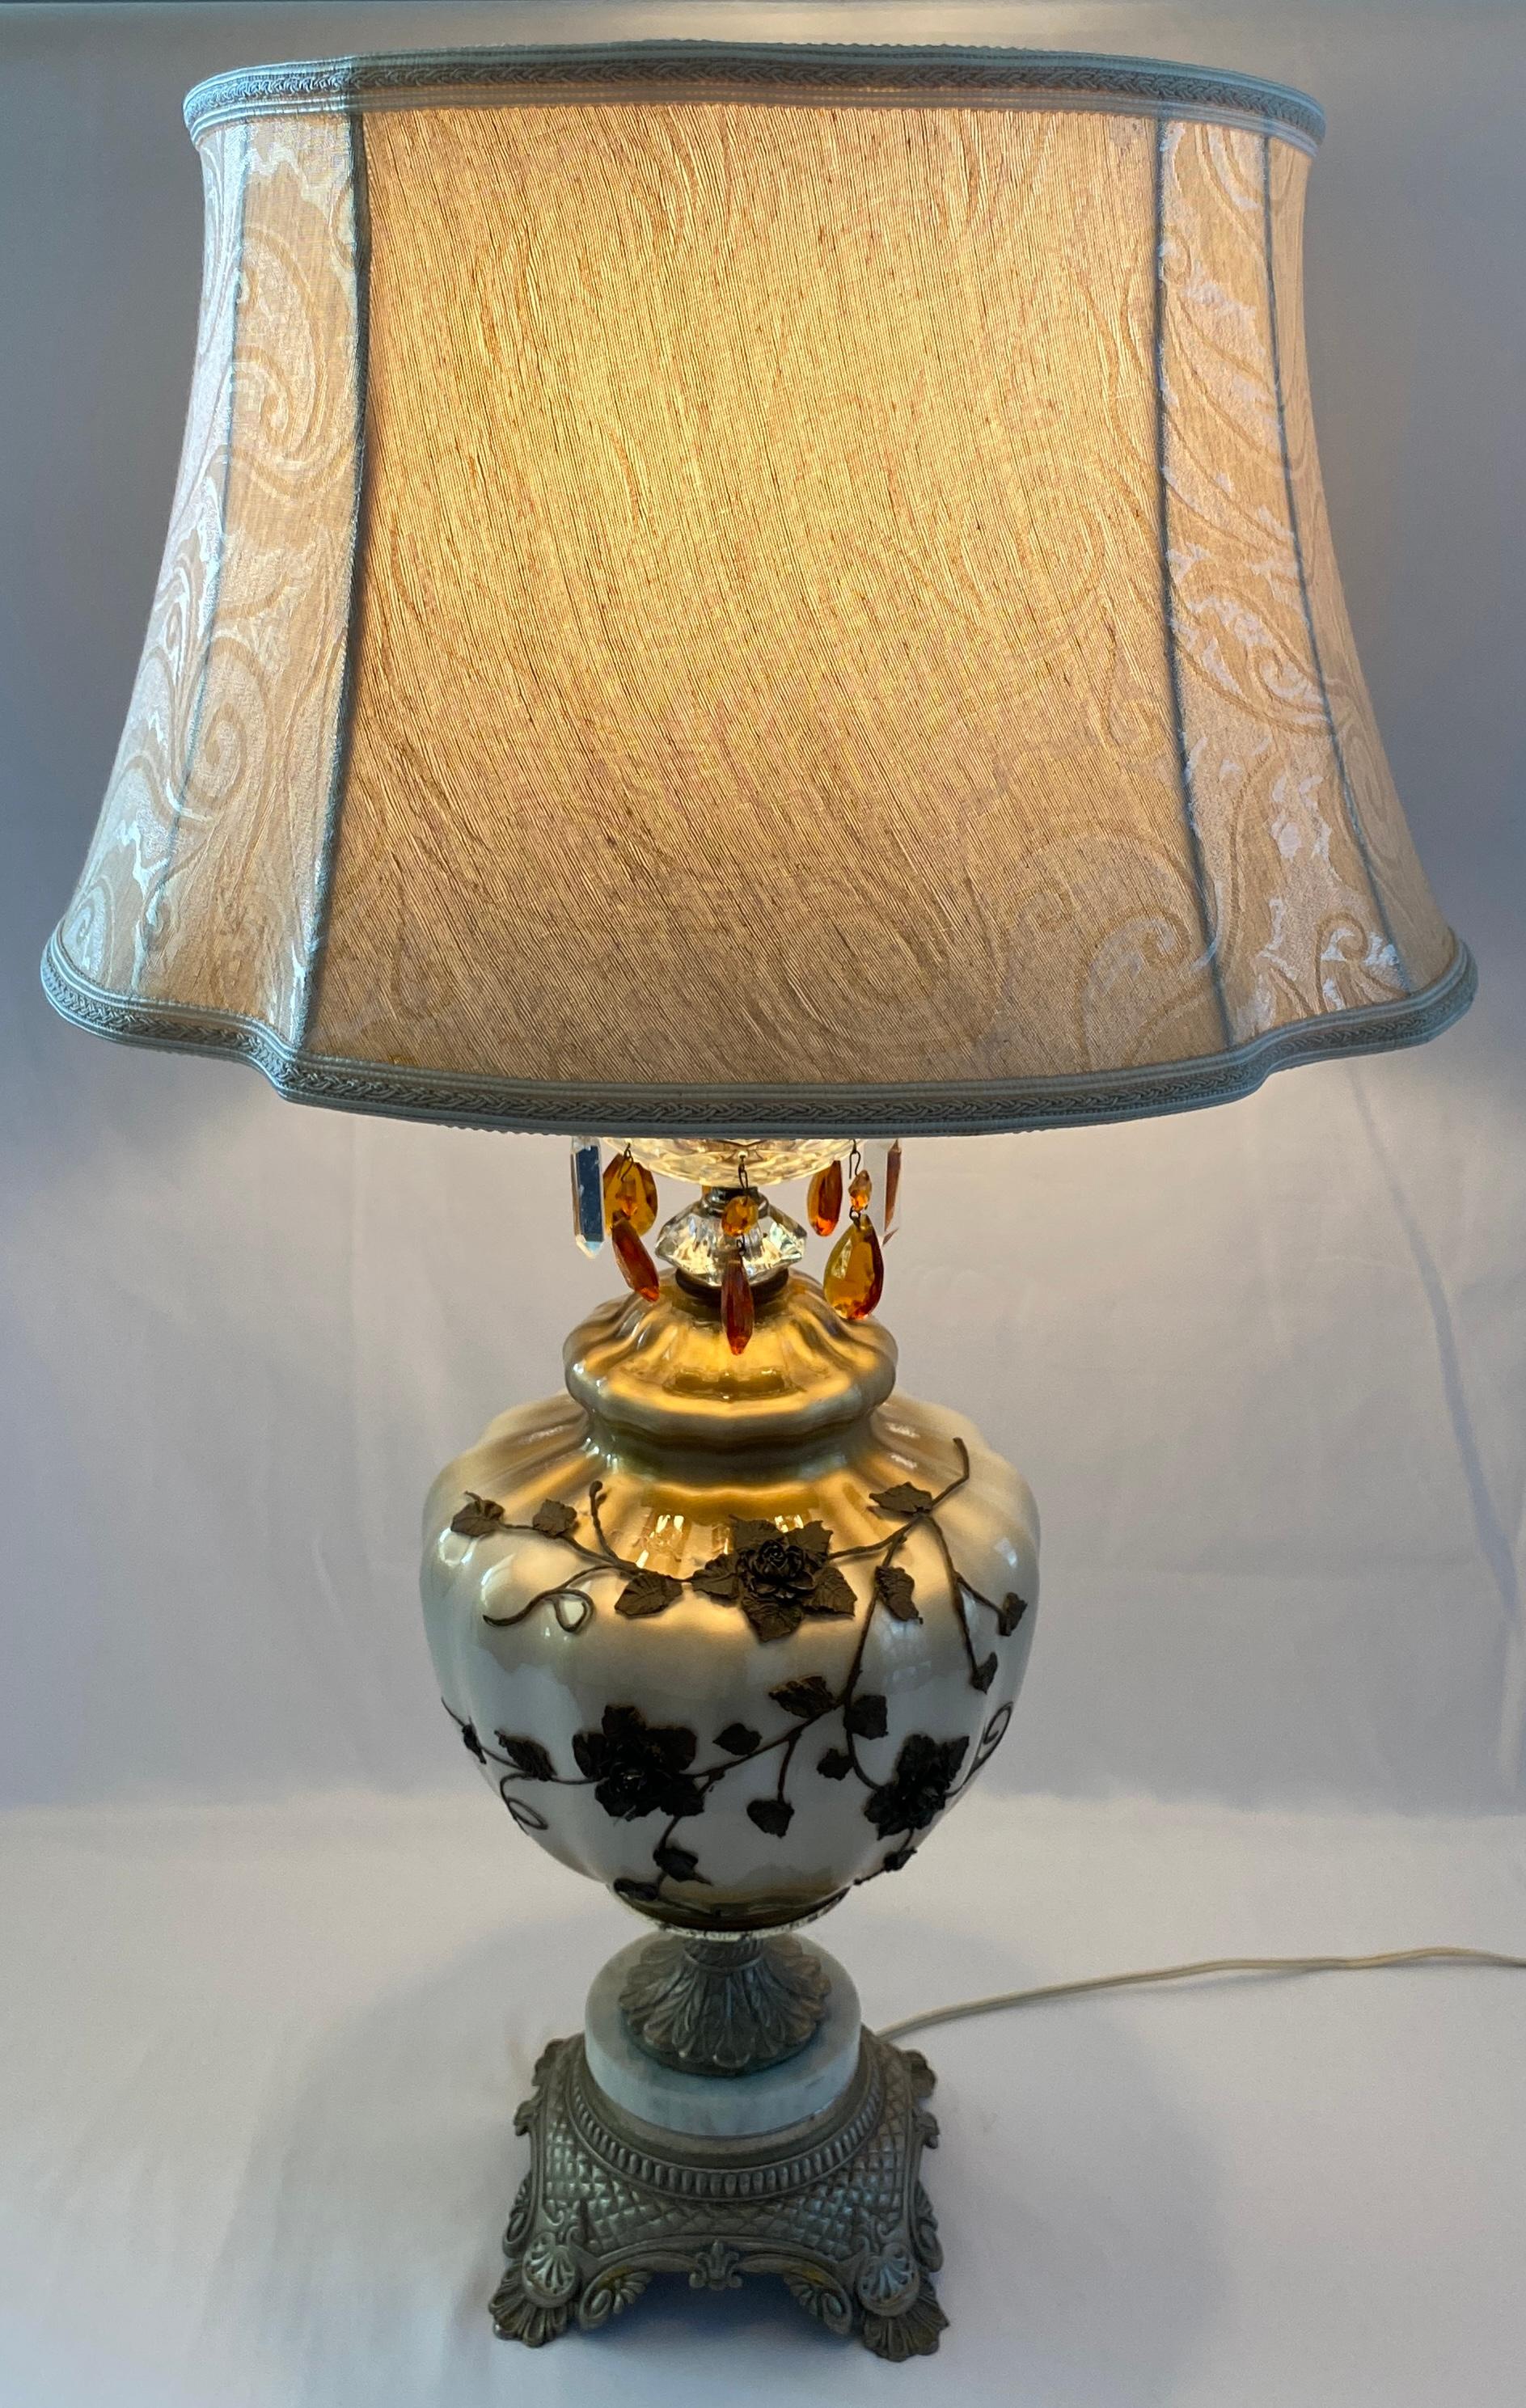 A nice pair of mid-century Opaline glass table lamps in the classical style. 
This good quality pair of table lamps feature custom lamp shades made of a silk blend. The lamps feature brass and marble bases. 

Place these in any traditional setting